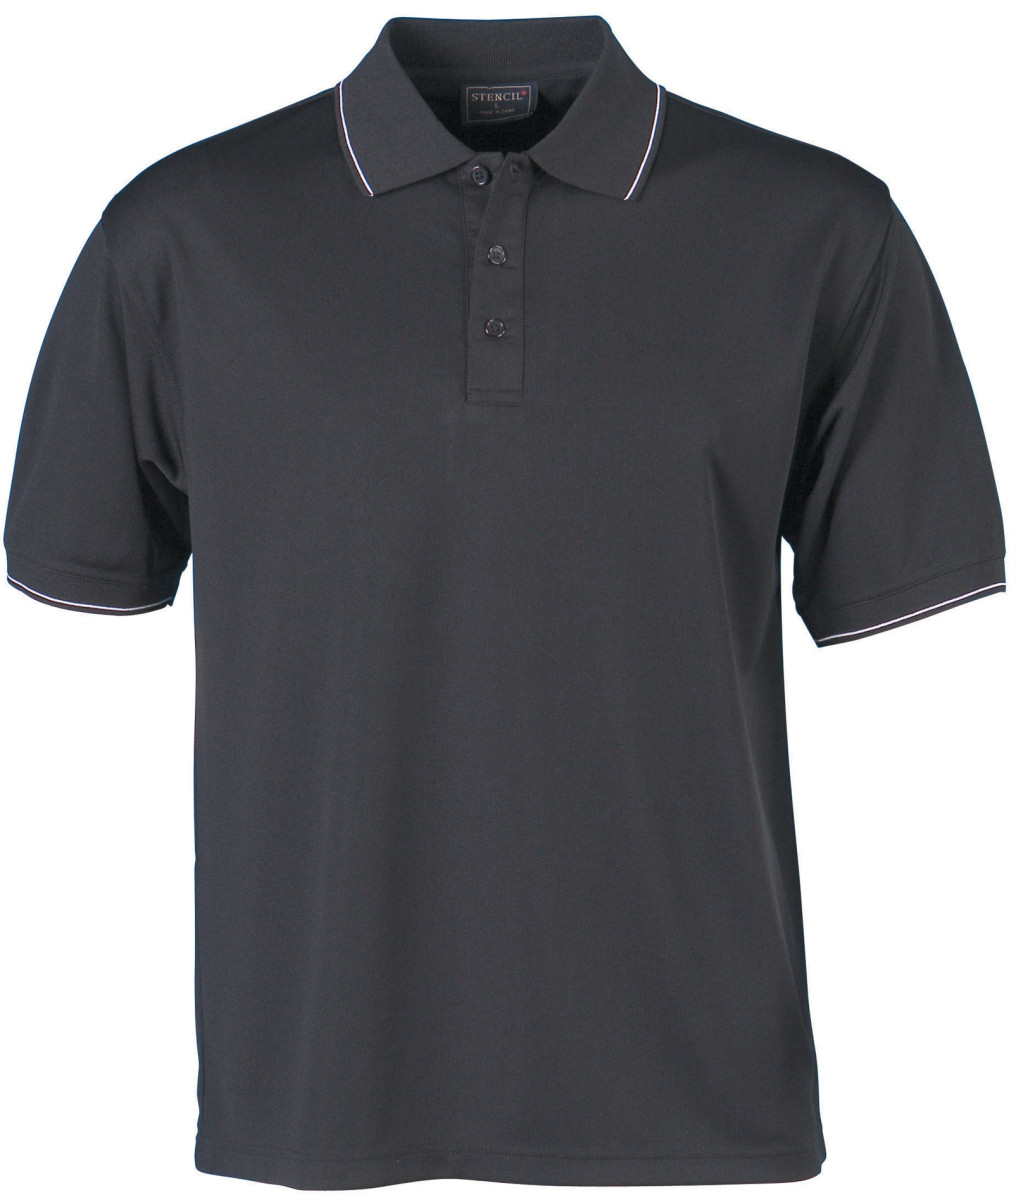 Mens Lightweight Cool Dry Polo Shirts - Black and White Beige | The ...